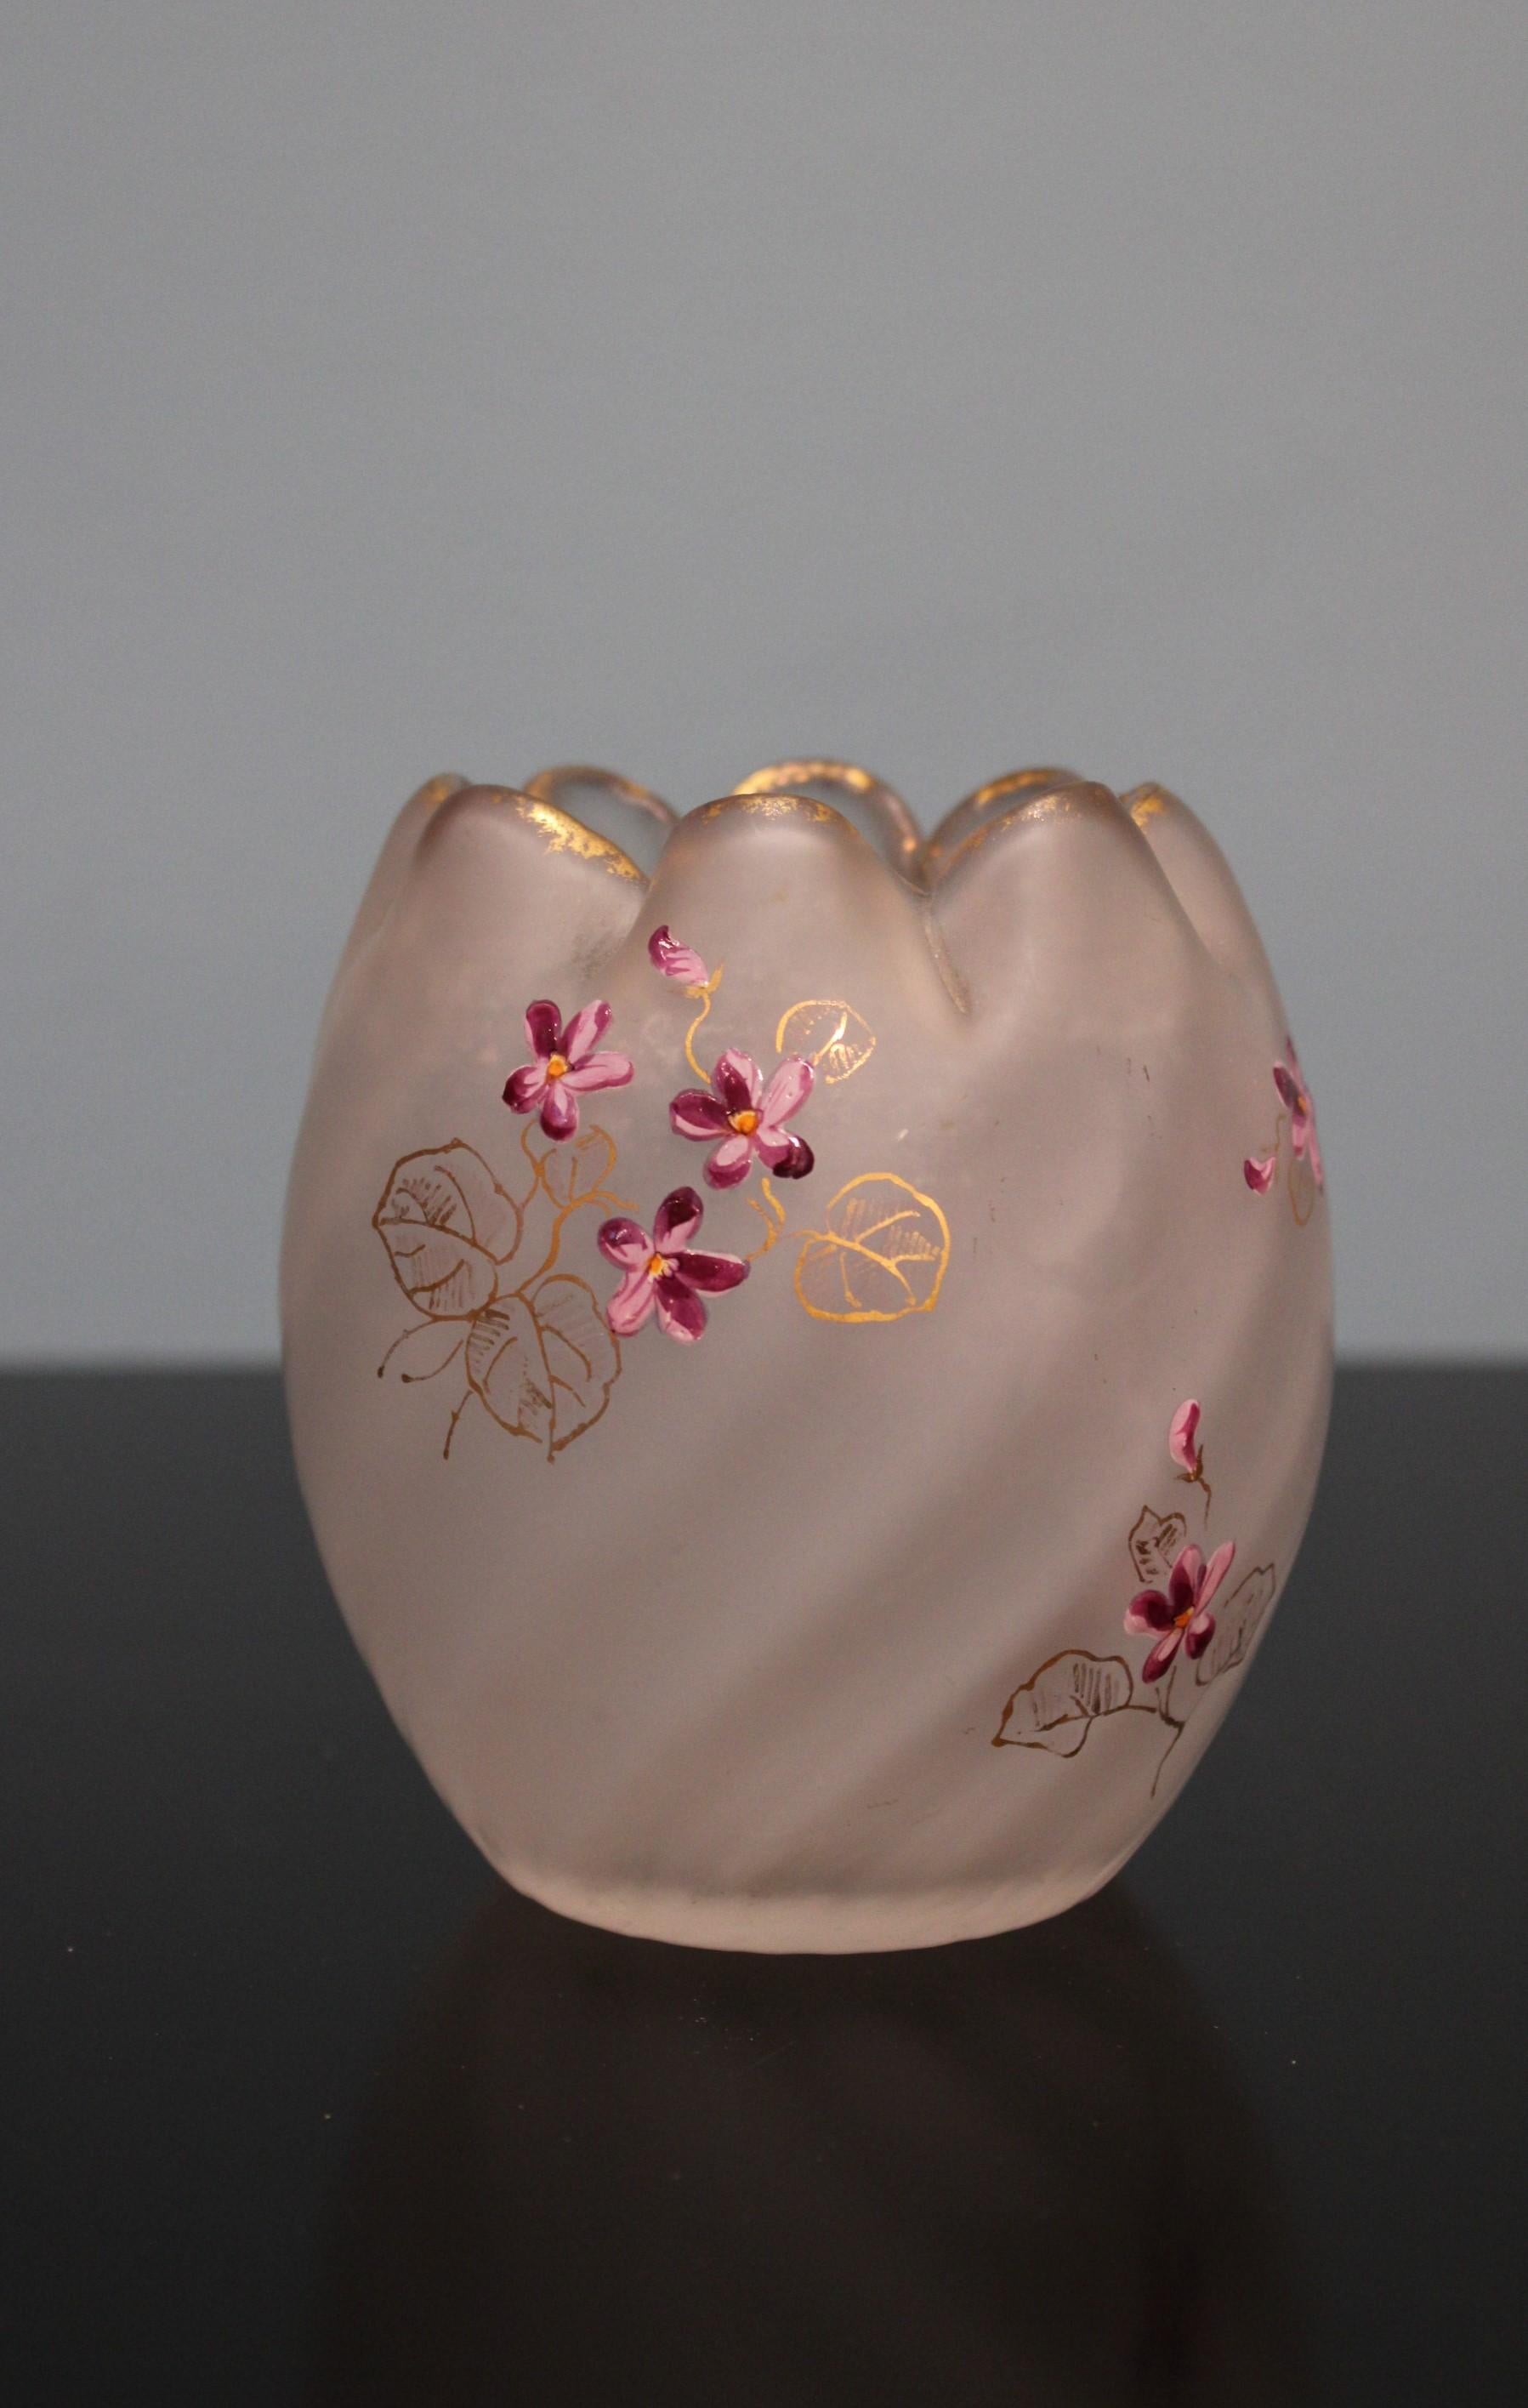 Enameled glass vase, Art Nouveau style.
Decorated with flowers.
Circa 1900.